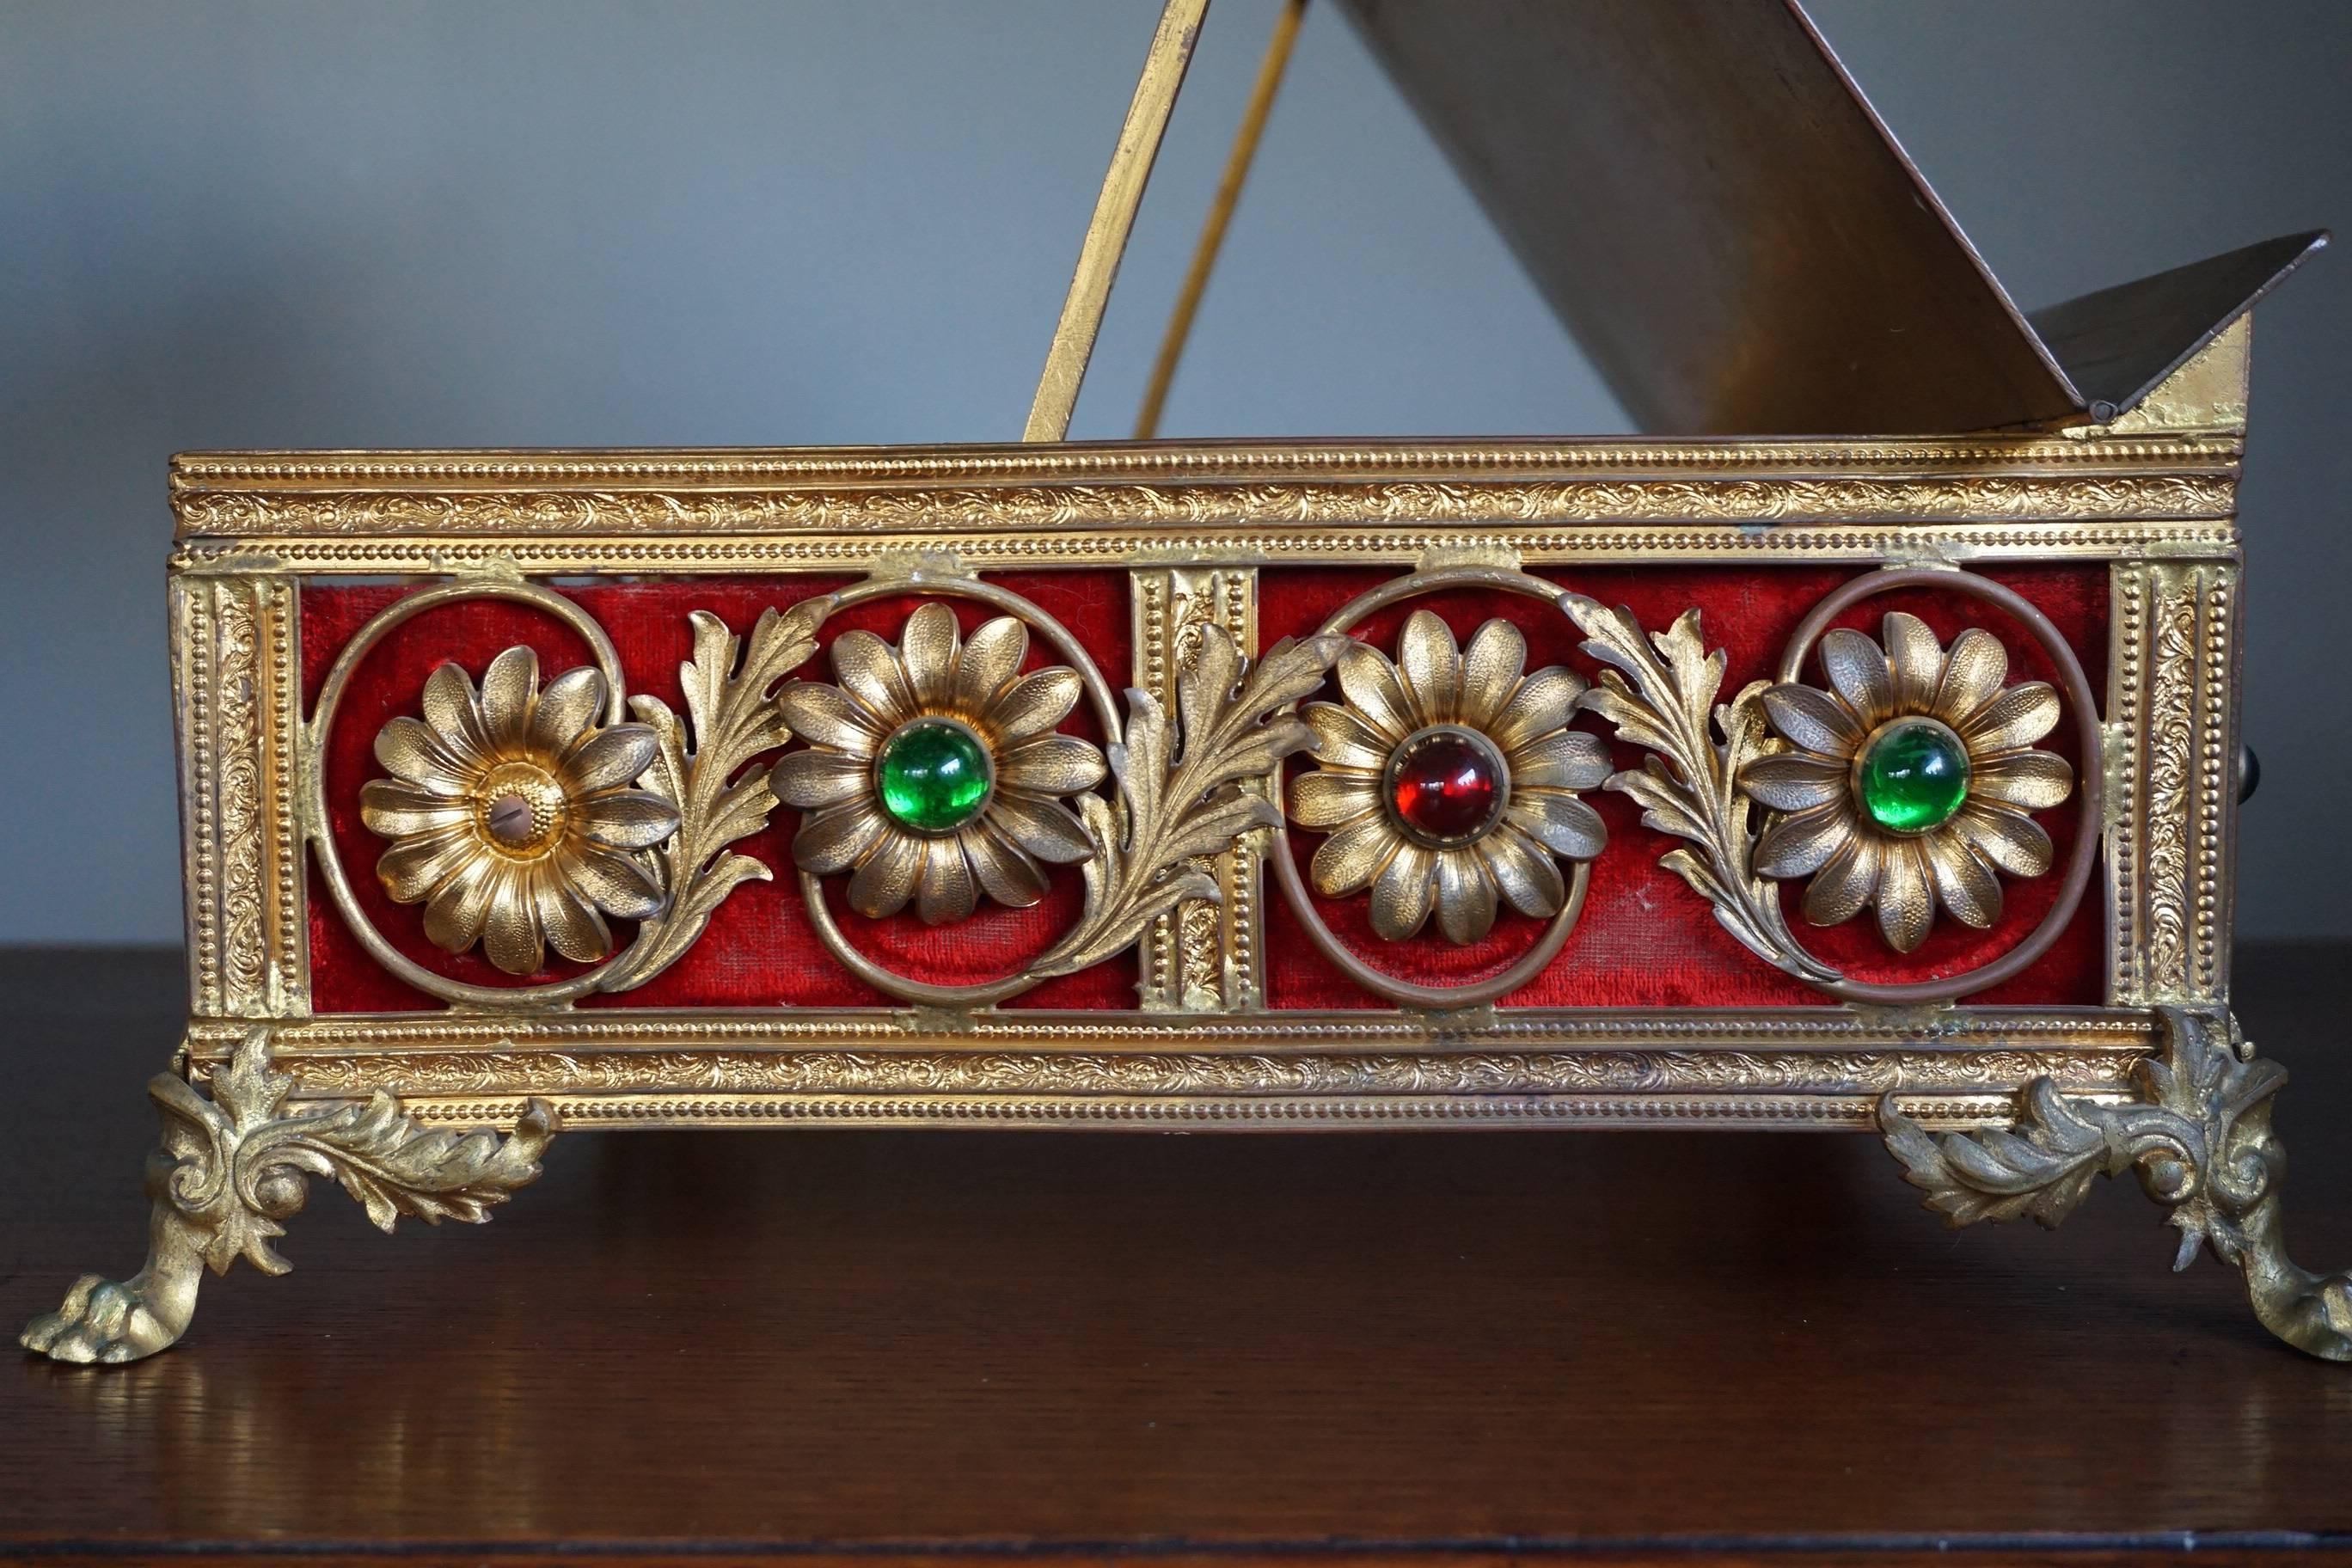 19th Century Gothic Revival Gilt Brass Bible Stand Inlaid with Cloisonné Cartouche of Christ